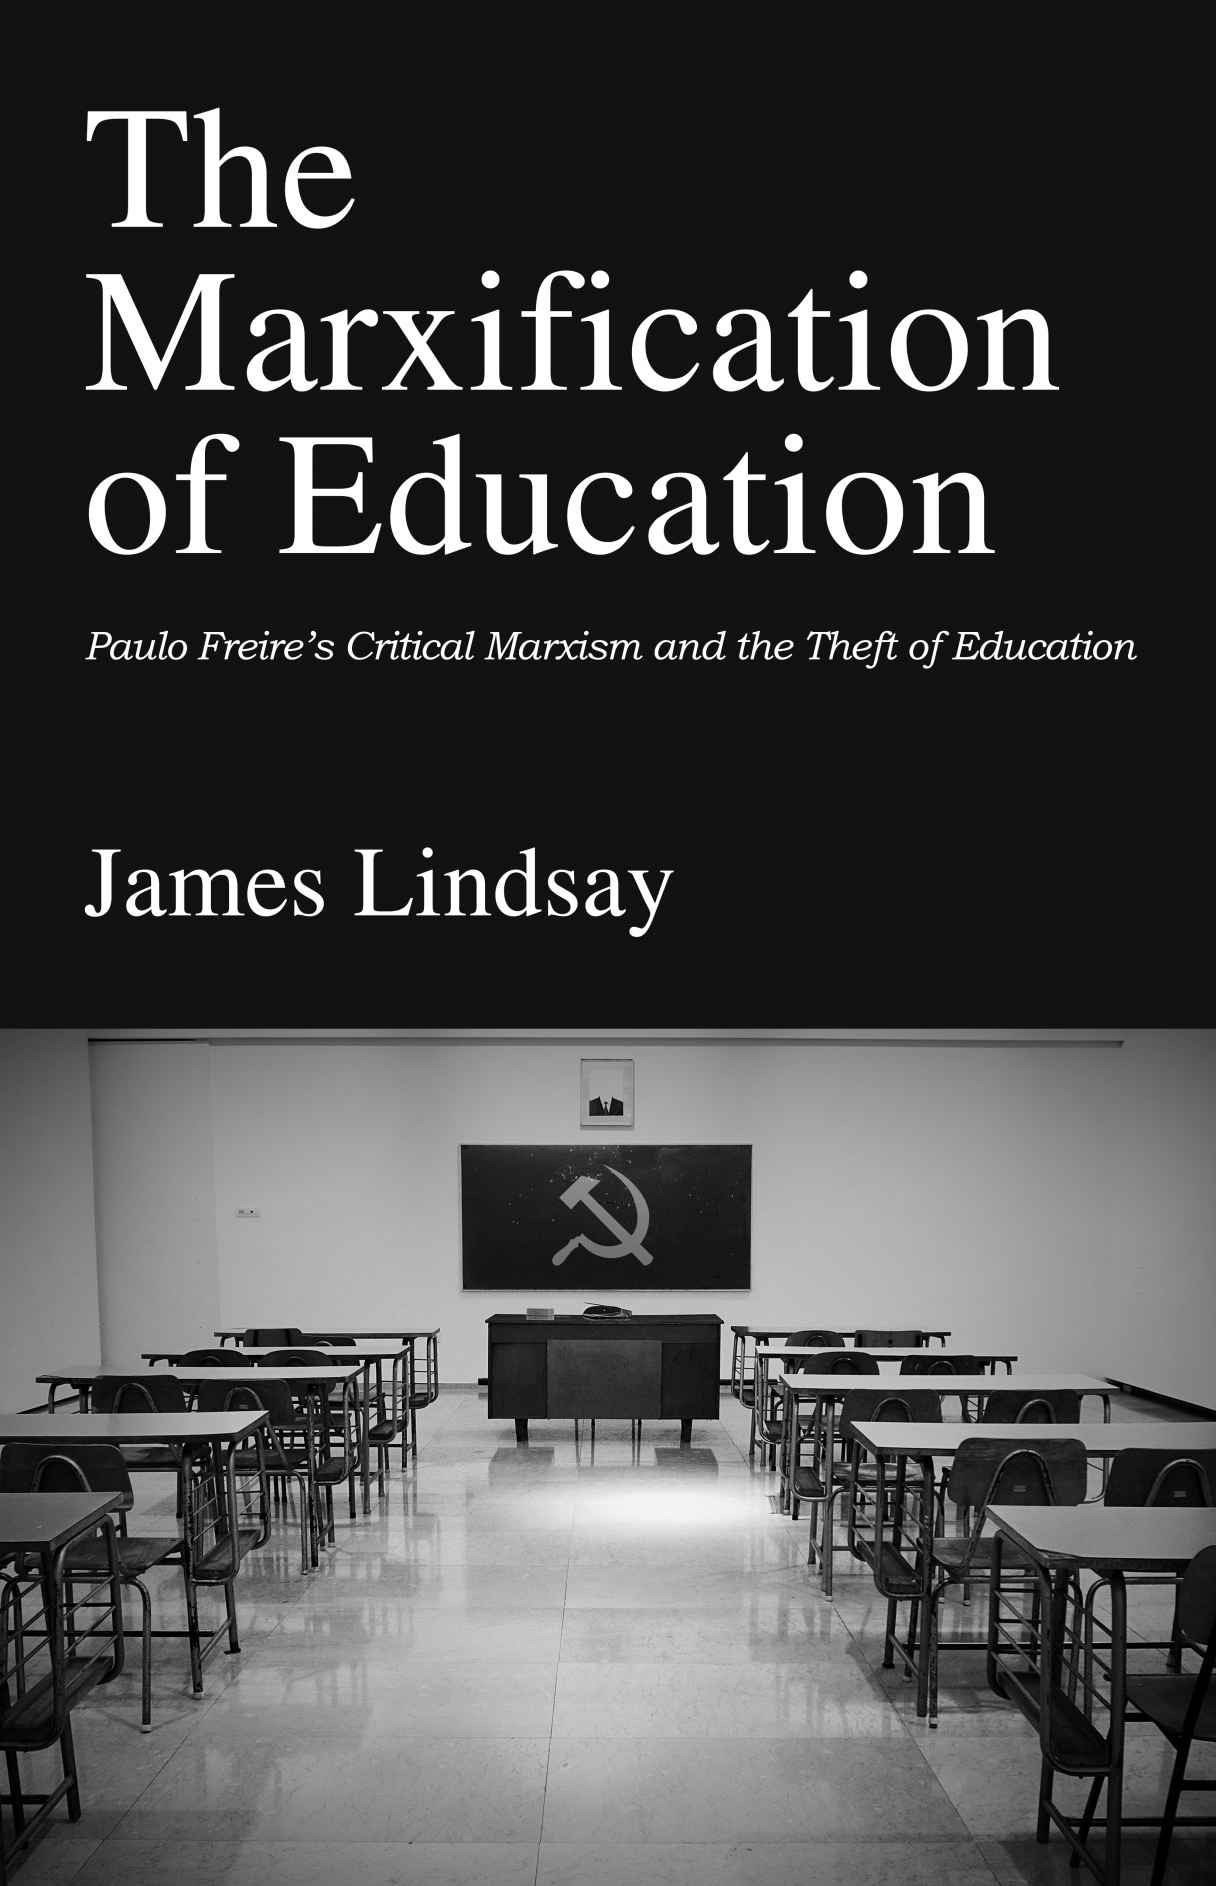 The Marxification of Education: Paulo Freire's Critical Marxism and Theft of Education